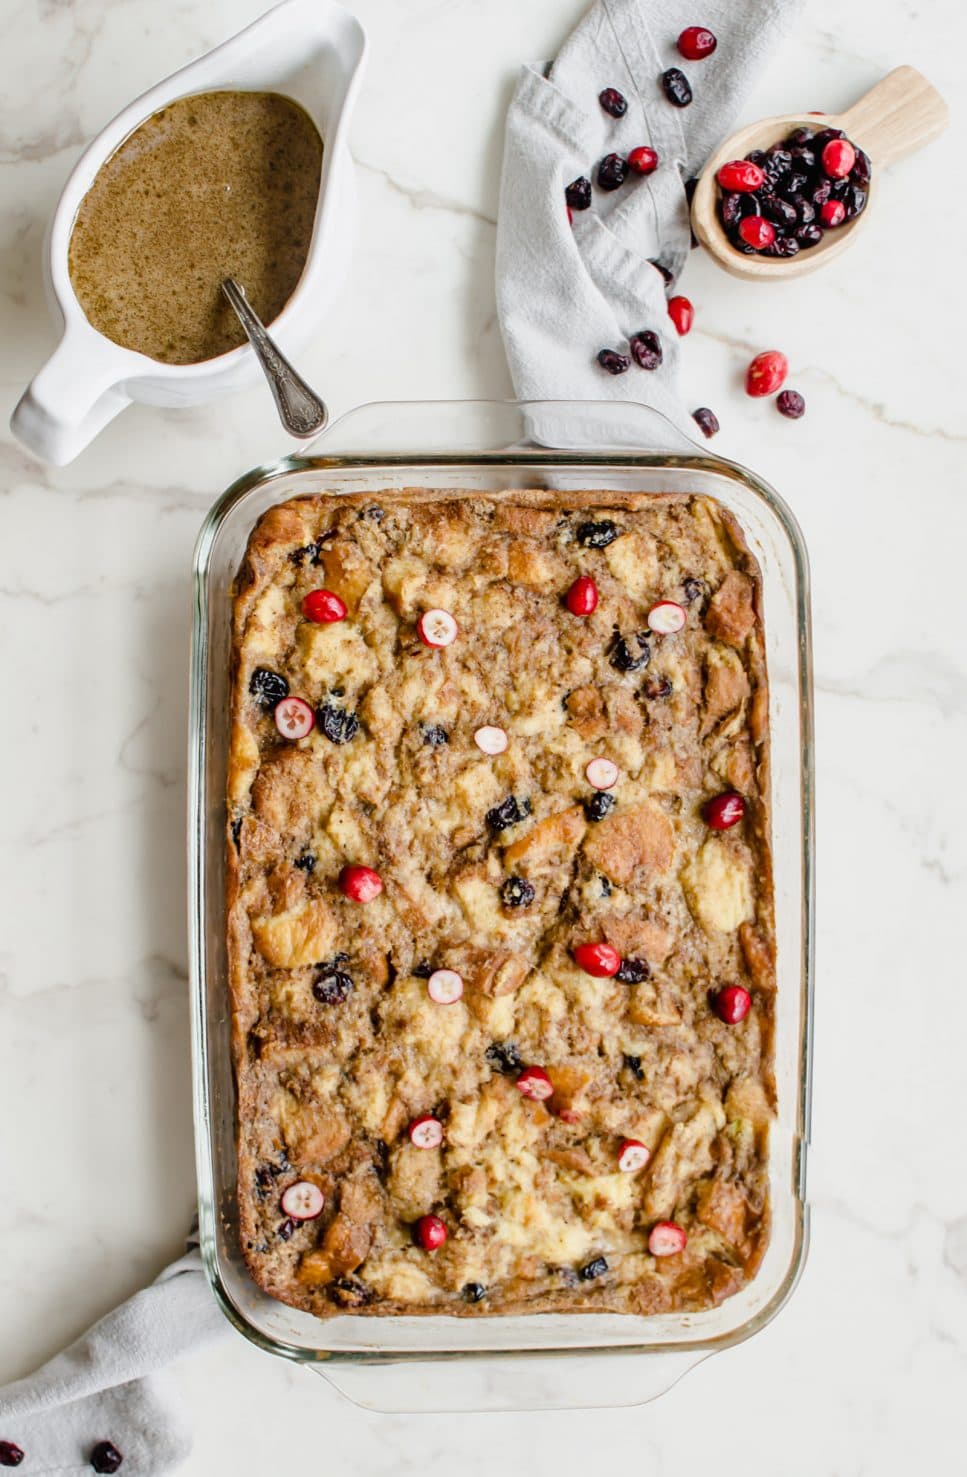 Glass casserole dish with a baked bread pudding.